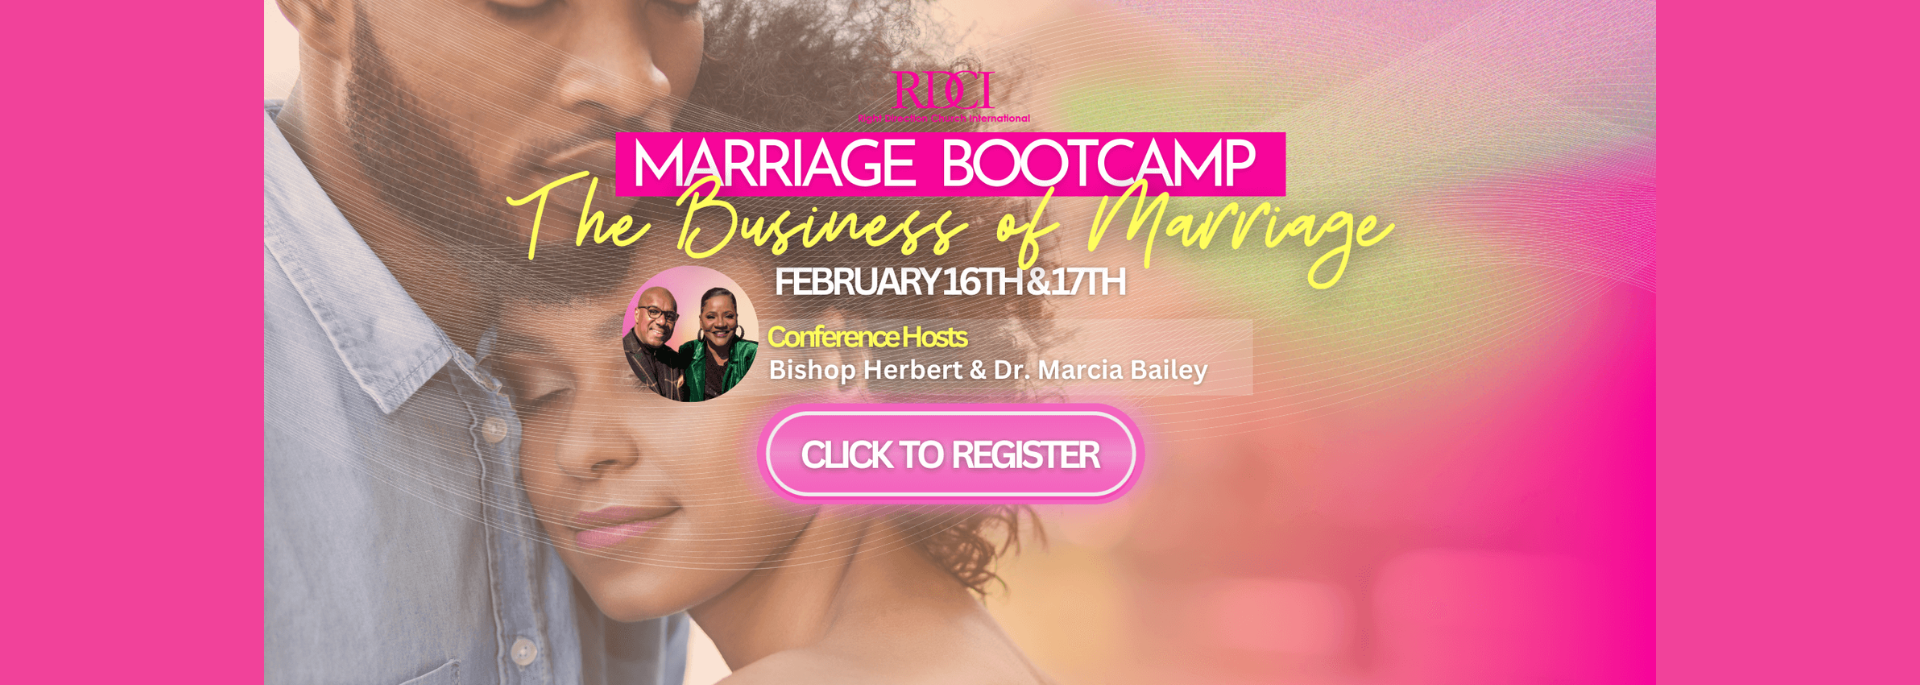 Marriage Bootcamp